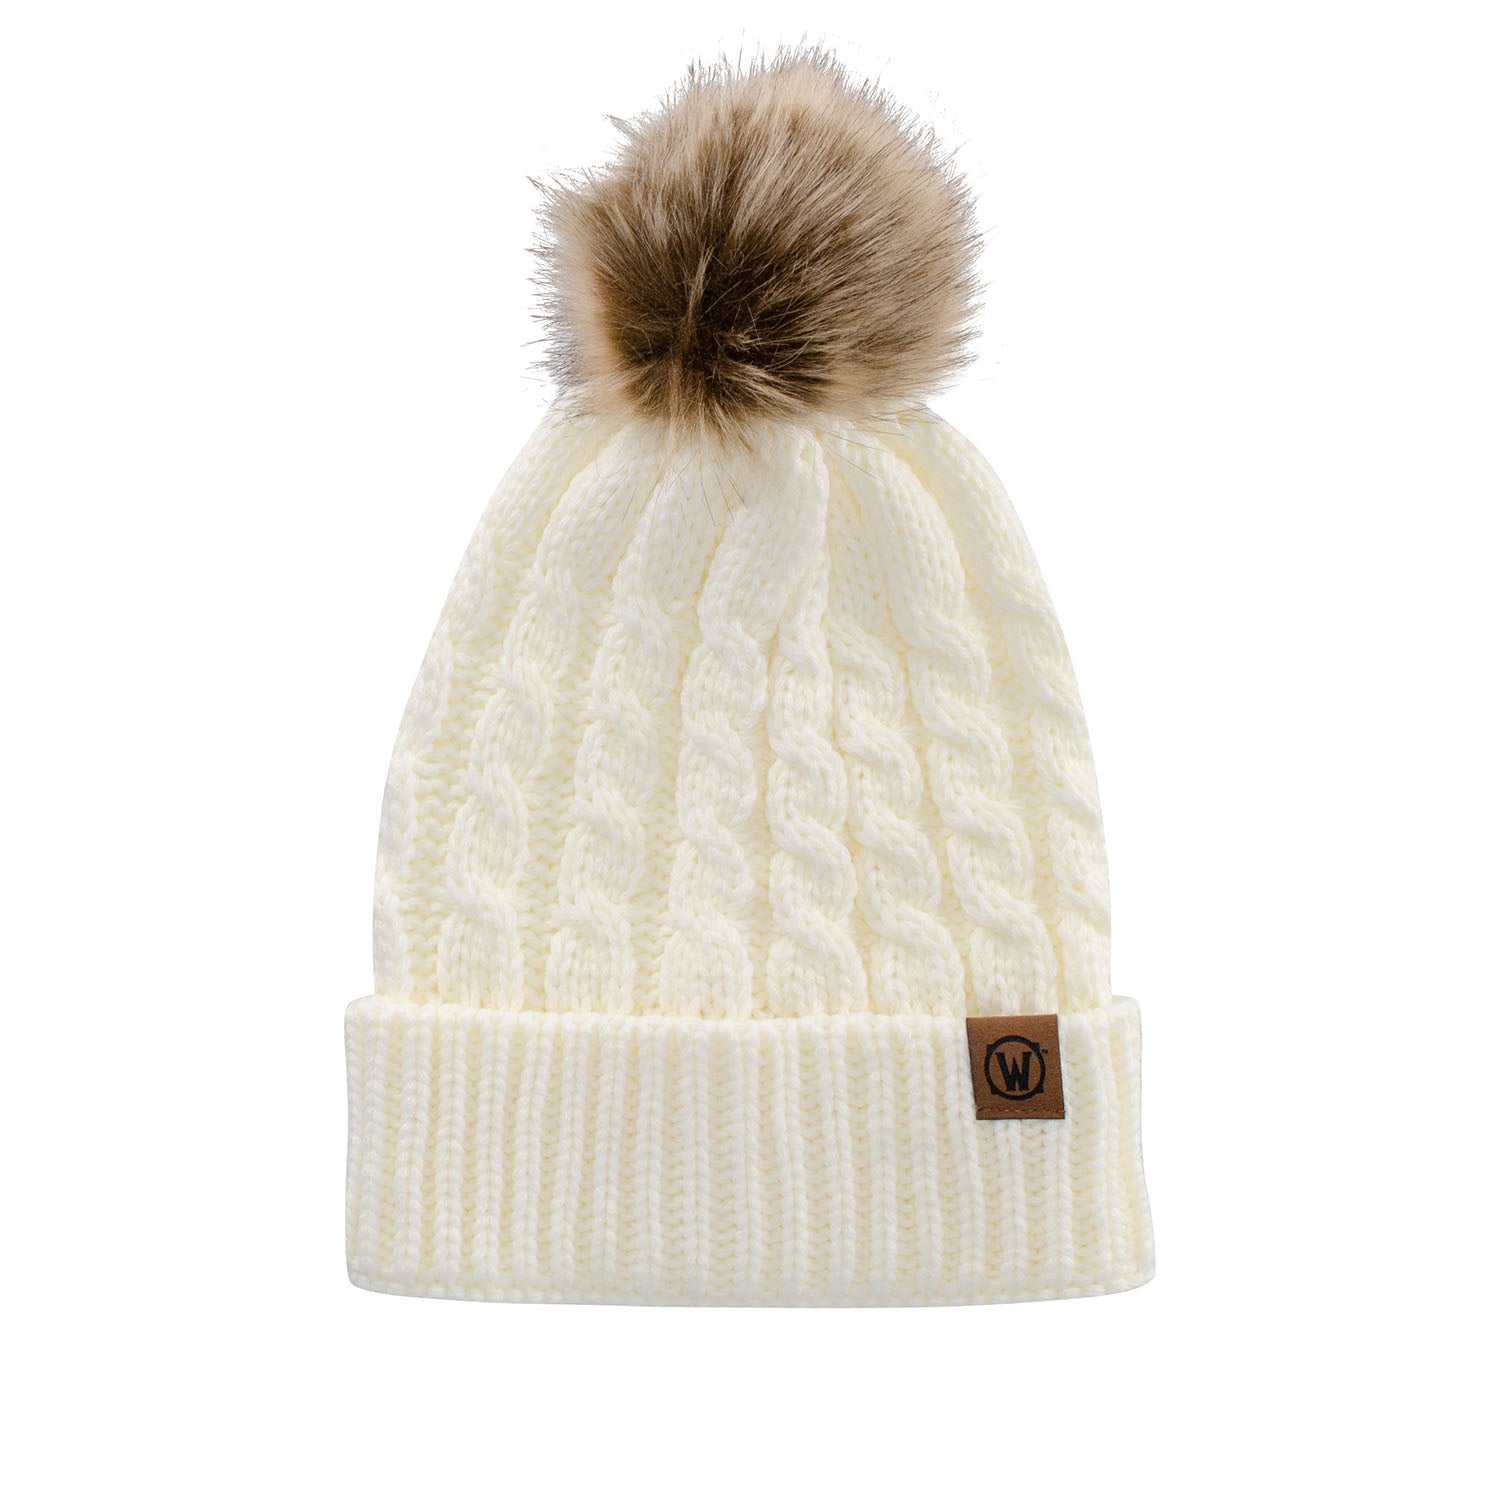 World of Warcraft Cream Faux Fur Pom Beanie - Front View